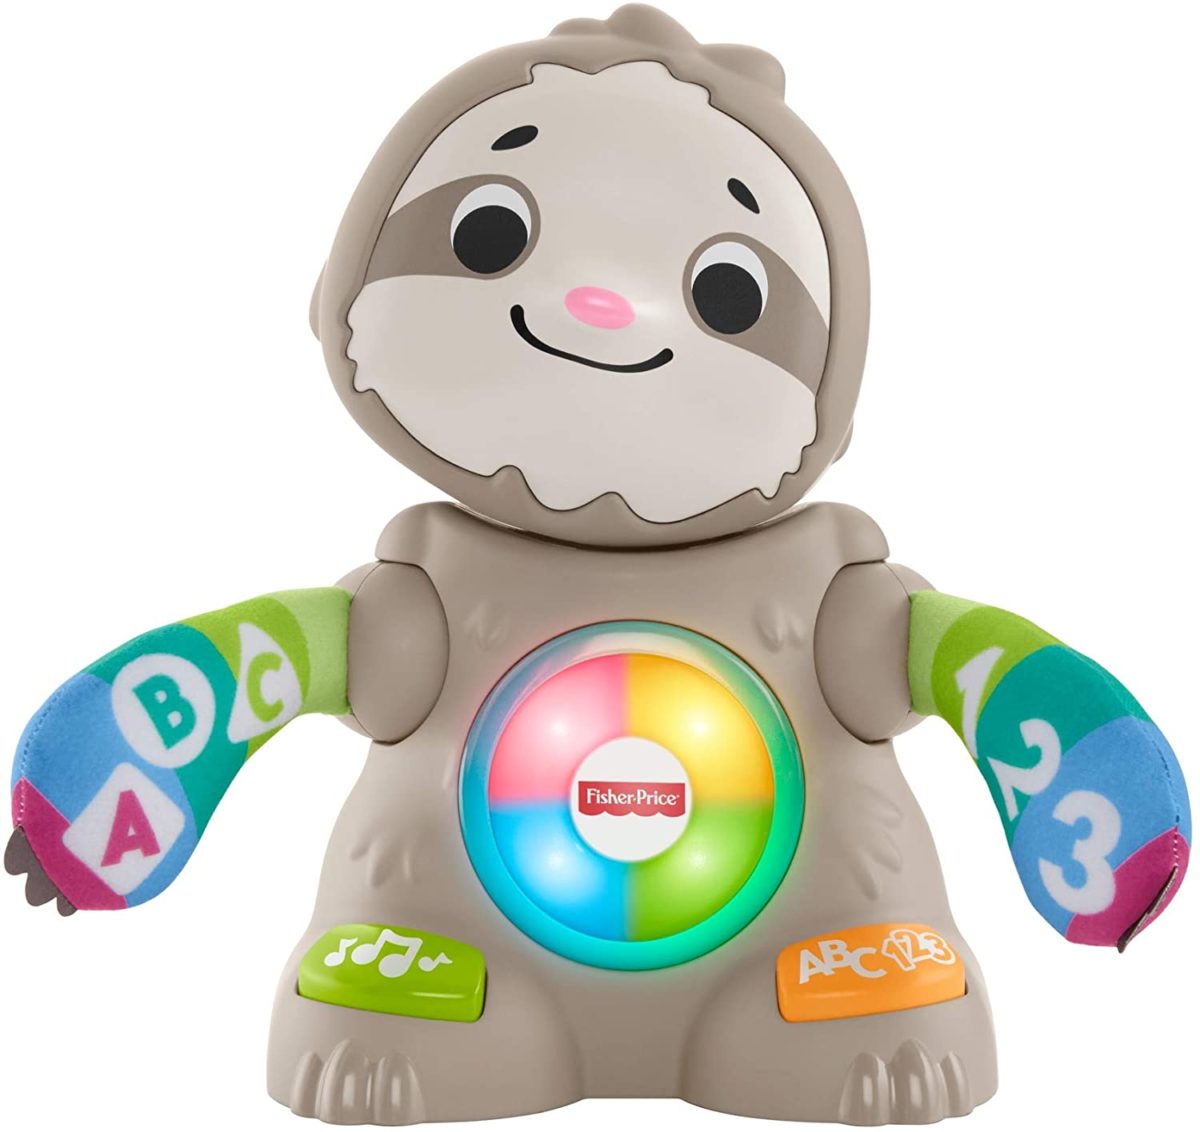 Top Quality Fisher-Price Toys That Come Highly-Rated, Educational, and Entertaining That You Can Buy for Your Little Ones Right Now on Amazon